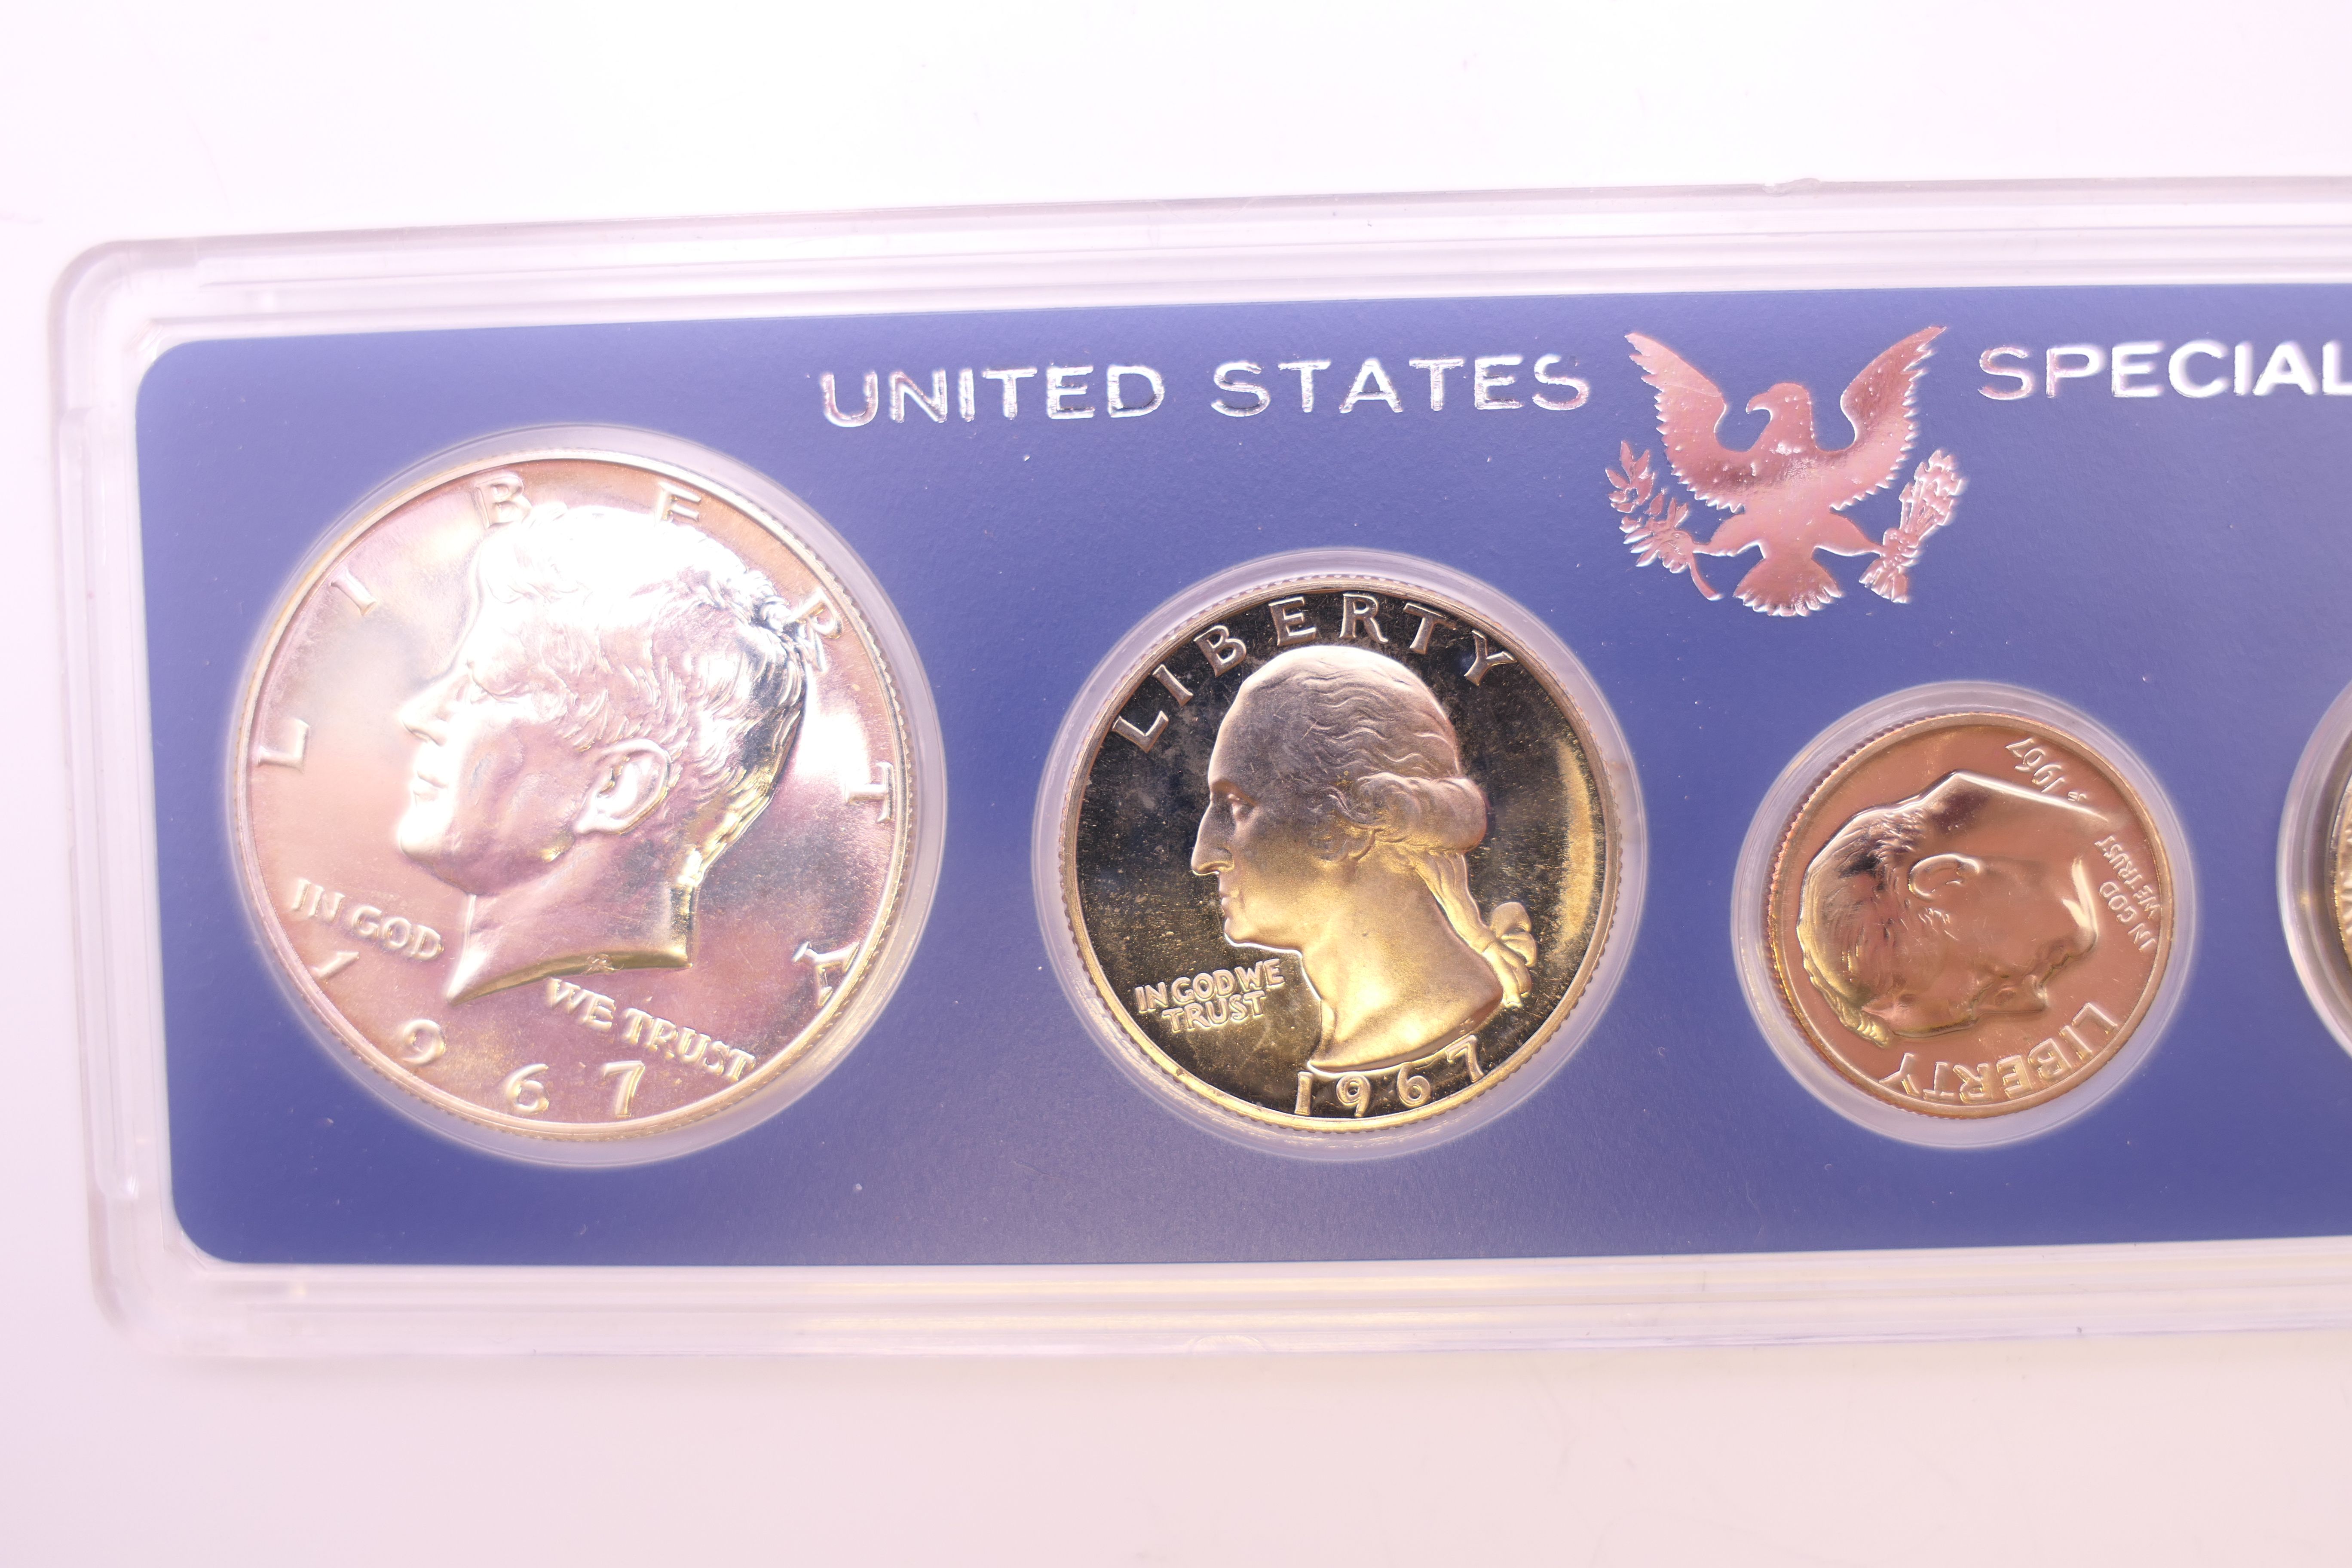 A United States Special Mint set. - Image 3 of 5